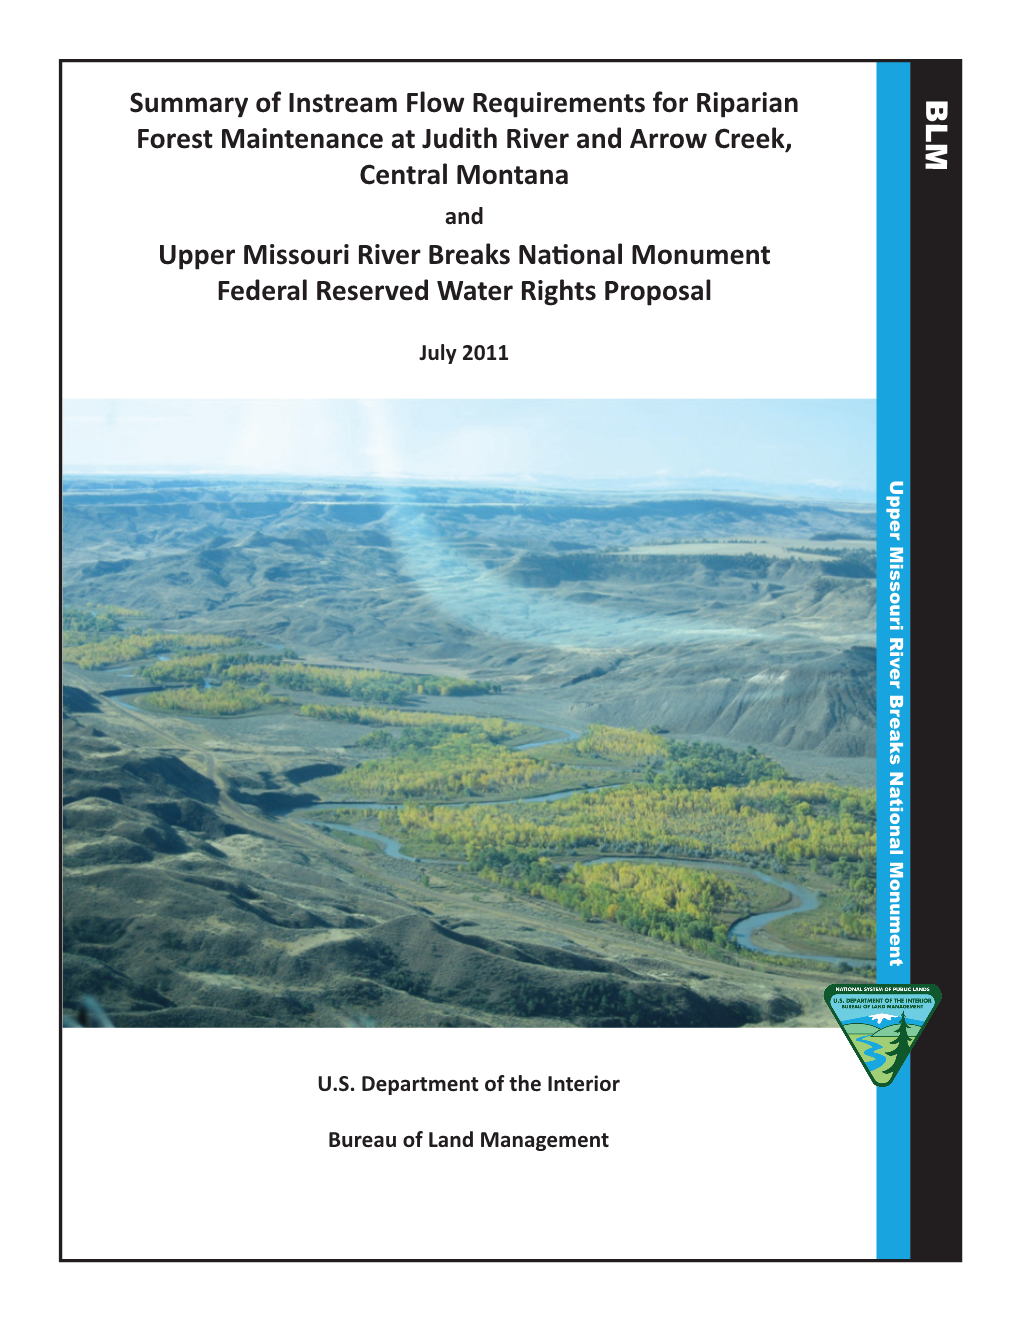 Summary of Instream Flow Requirements for Riparian Forest Maintenance at Judith River and Arrow Creek, Central Montana